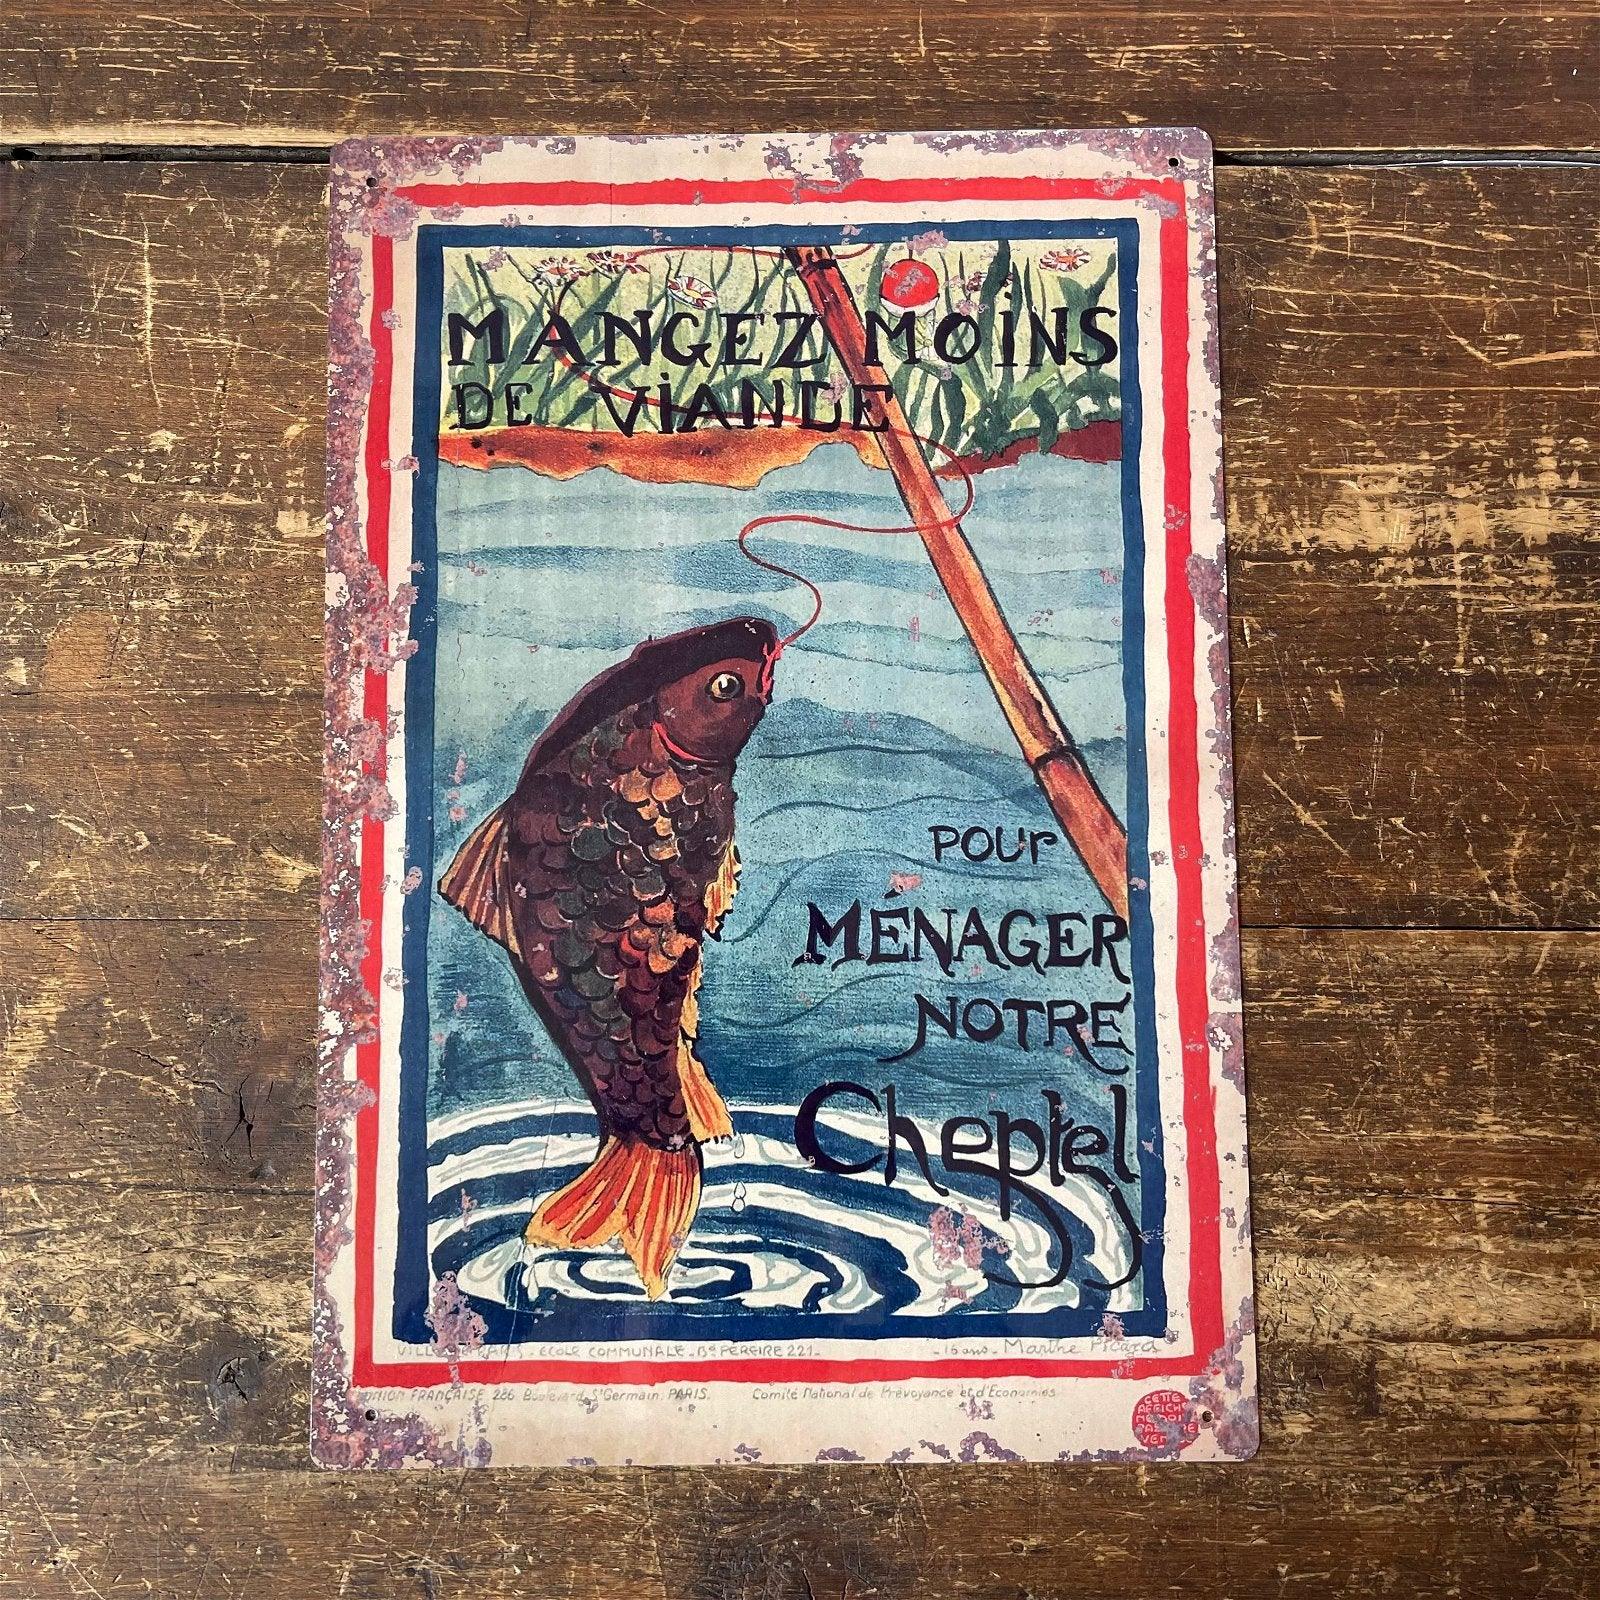 https://cdn.shopify.com/s/files/1/0600/7023/2109/products/vintage-metal-sign-old-fishing-sign-signs-rules-2.jpg?v=1680131332